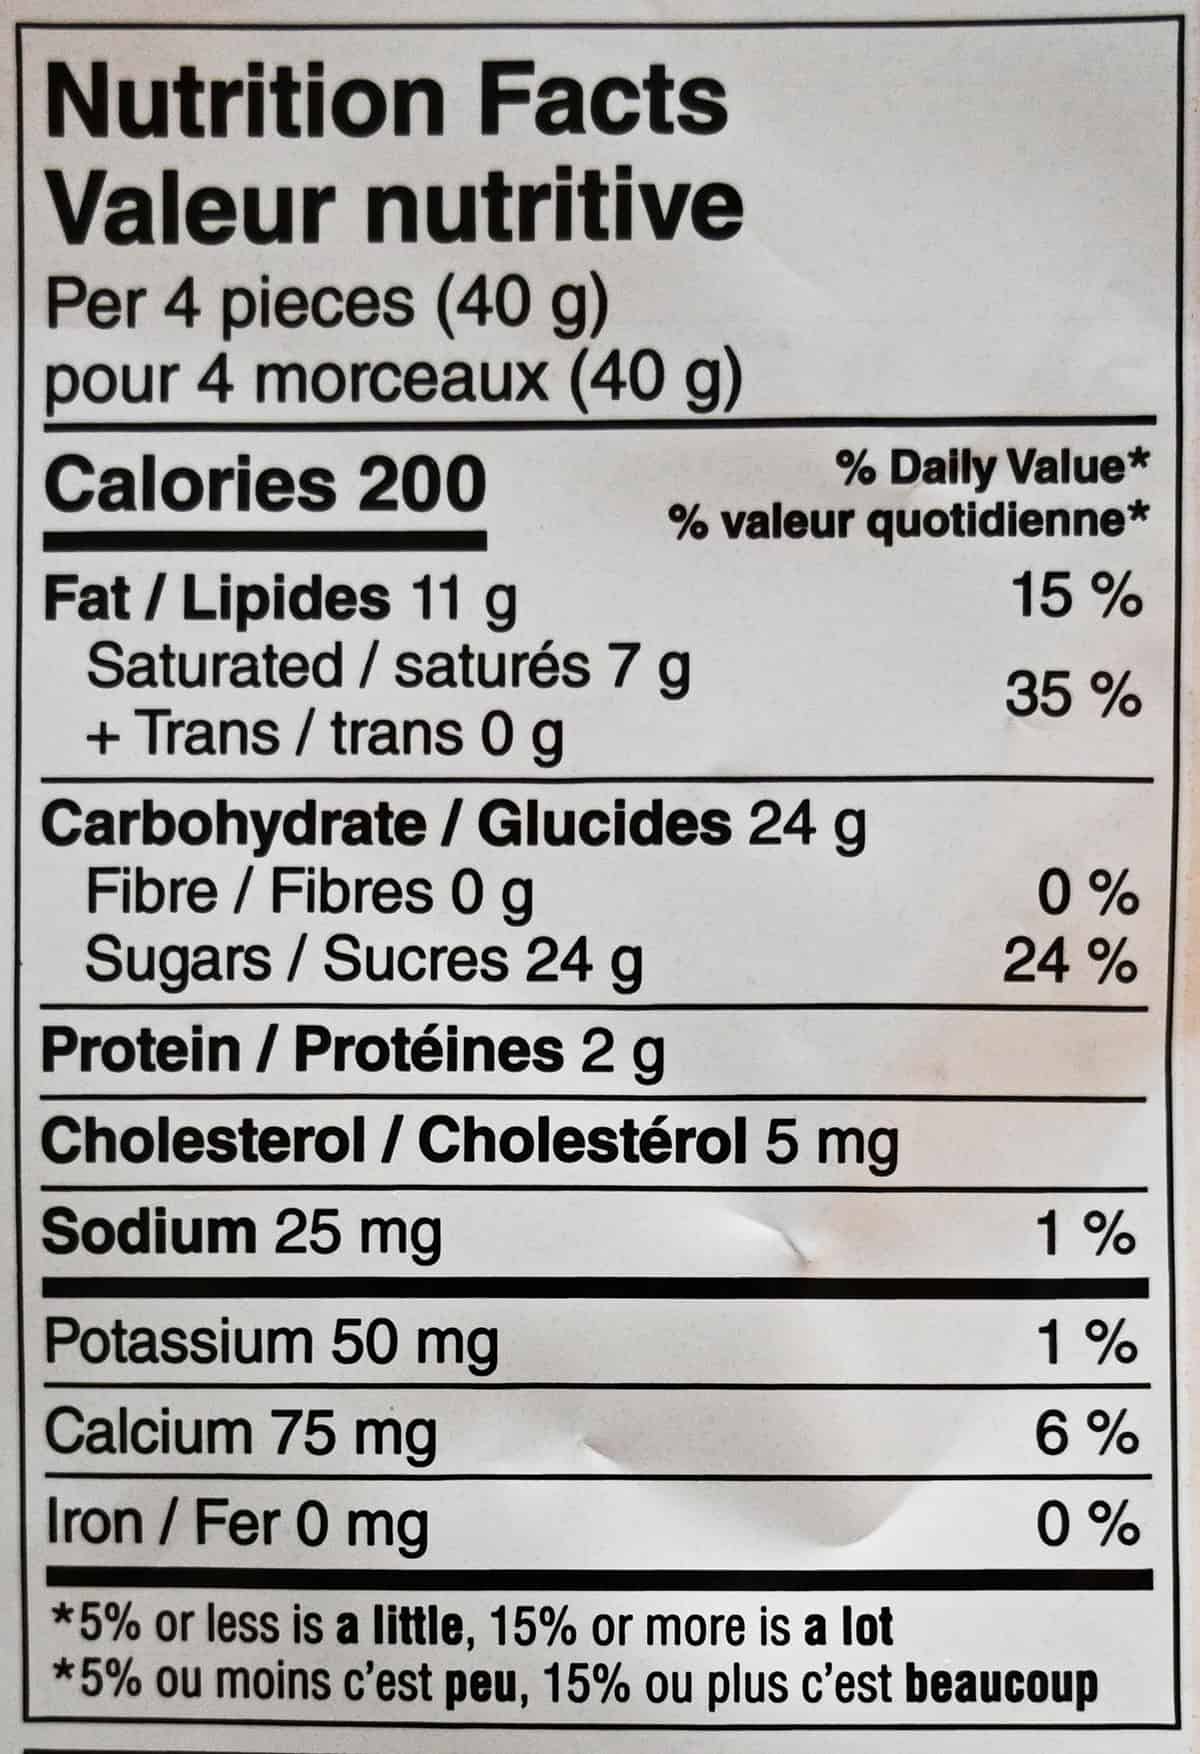 Image of the nutrition facts from the back of the bag.